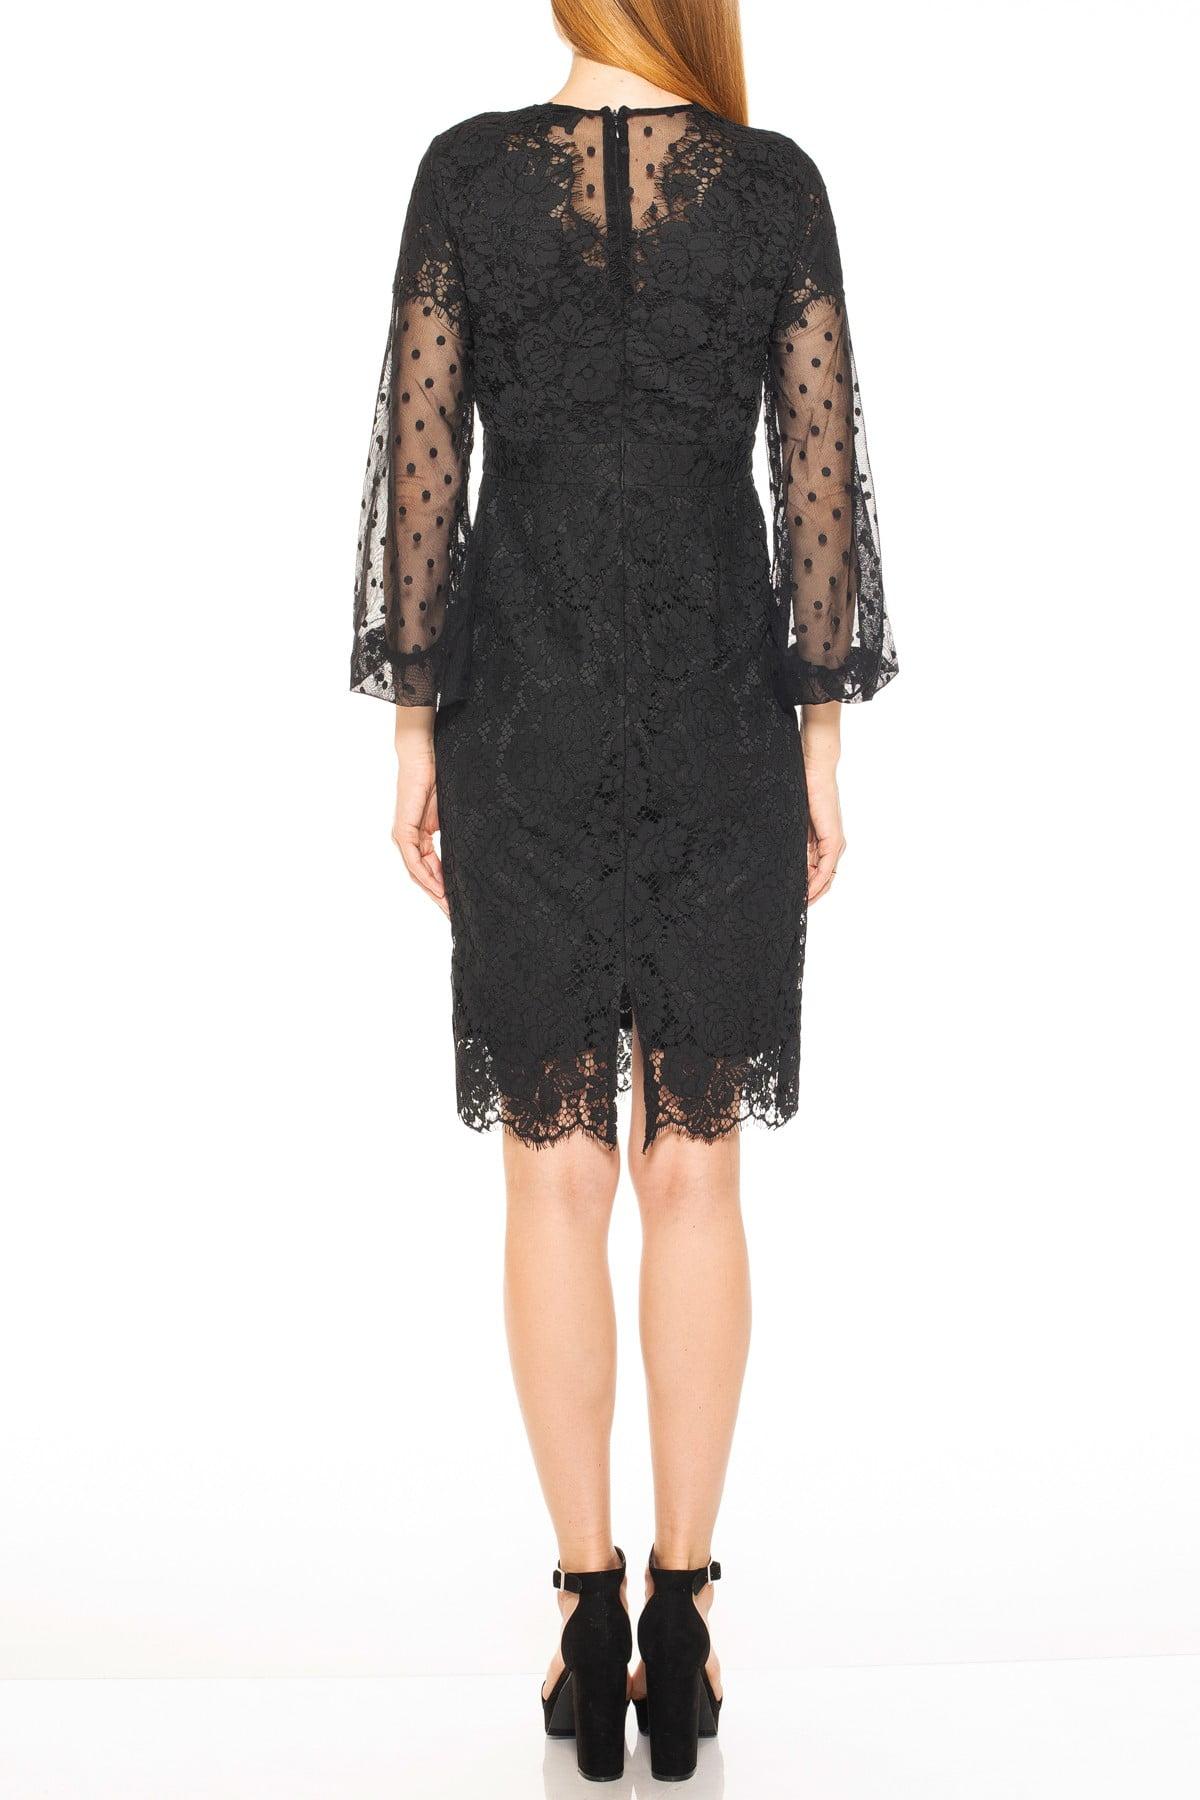 Alexia Admor Bubble Sleeve Lace Dress in Black - Lyst